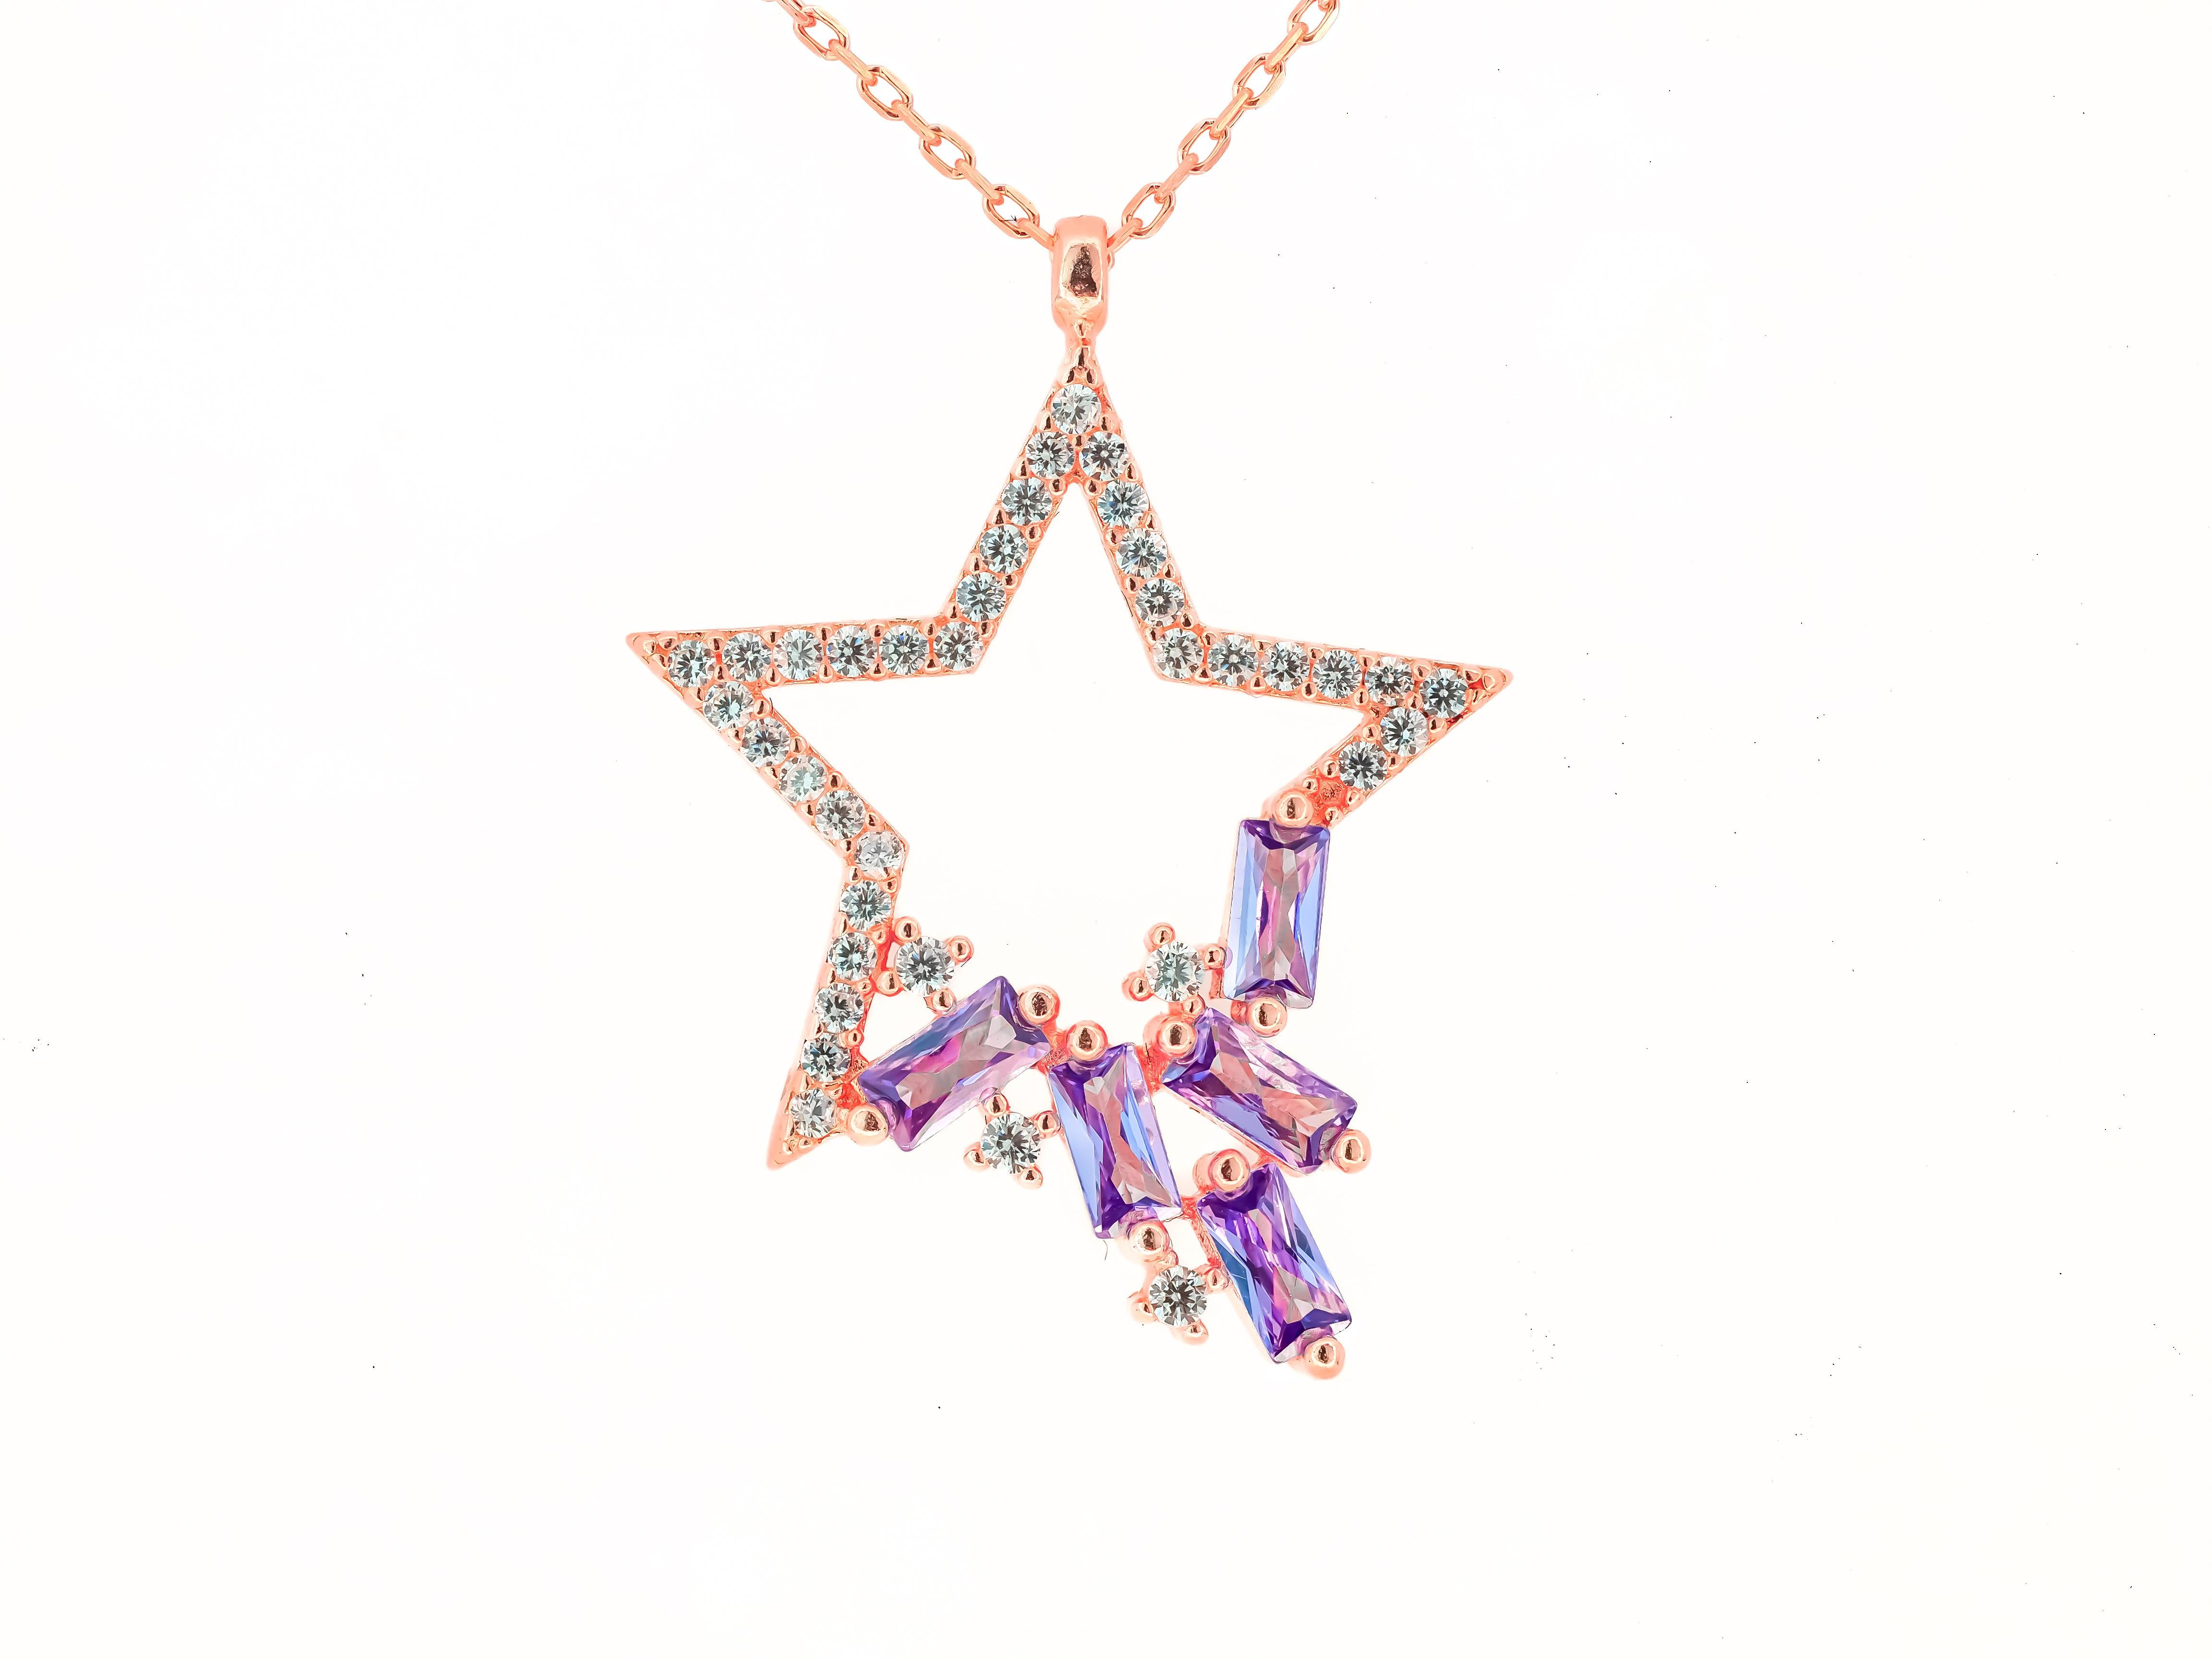 Modern Star Pendant Necklace with Colored Gemstones, Chain Necklace with Star Pendant